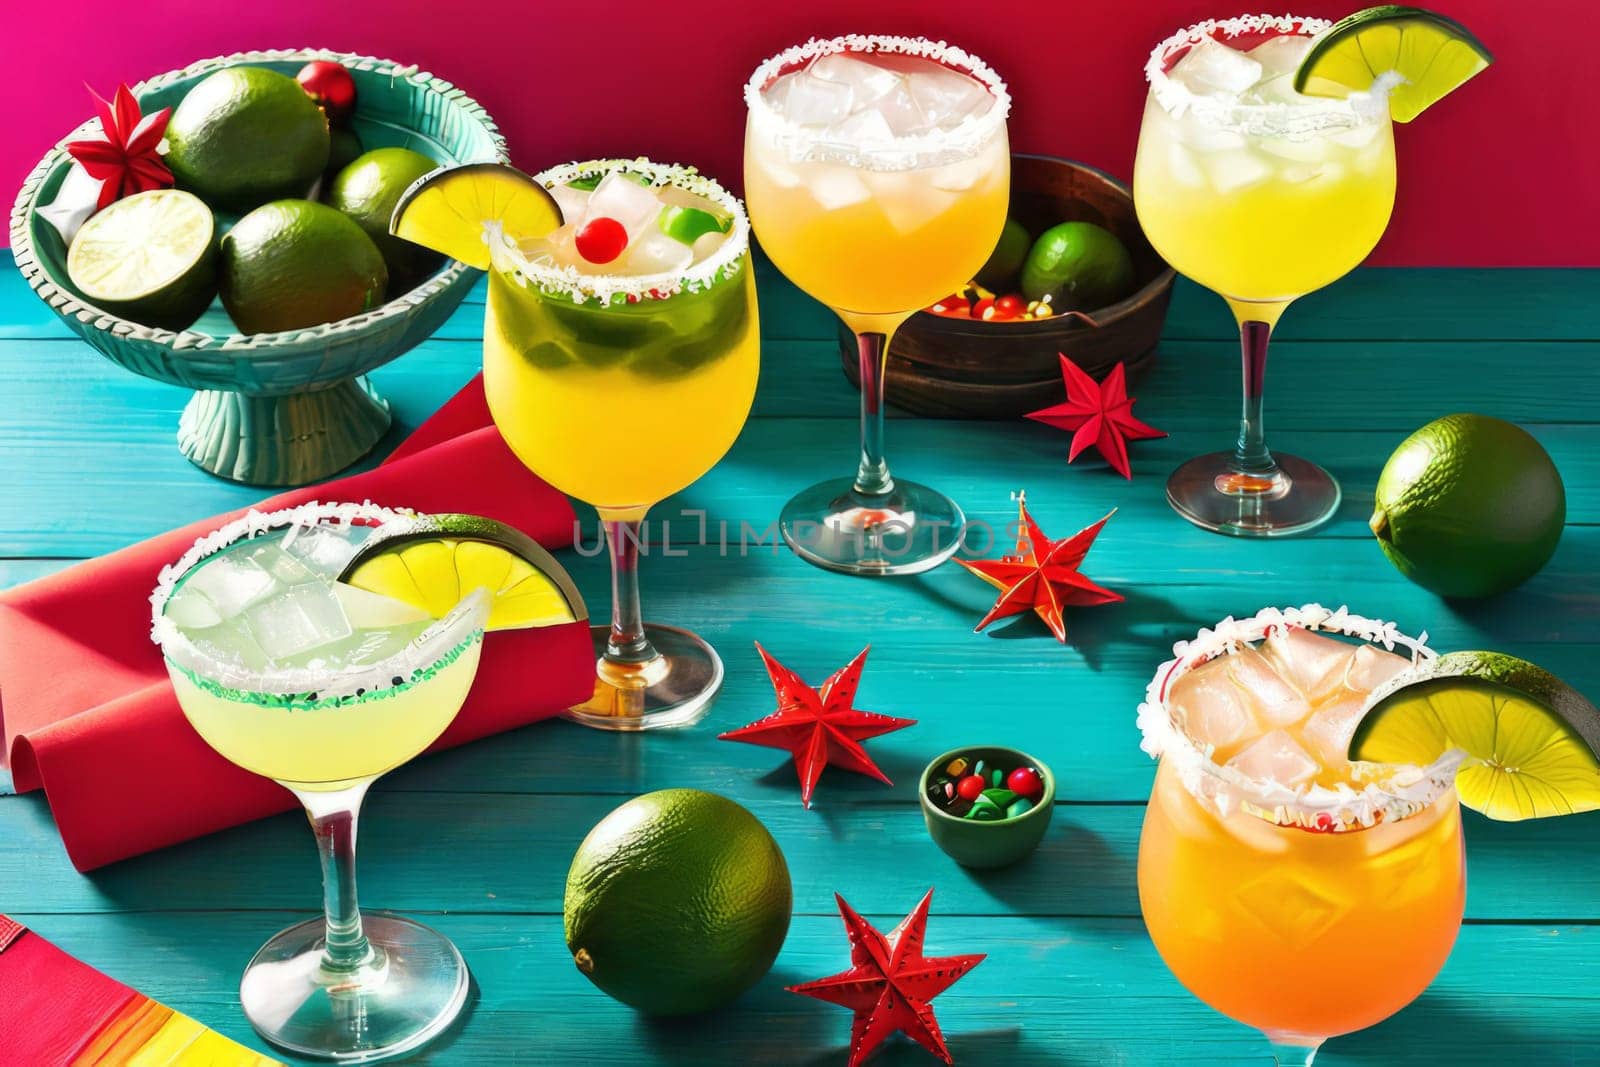 A vibrant and colorful display of cinco de mayo cocktails surrounded by festive decorations, creating a perfect setting for a celebratory fiesta or party